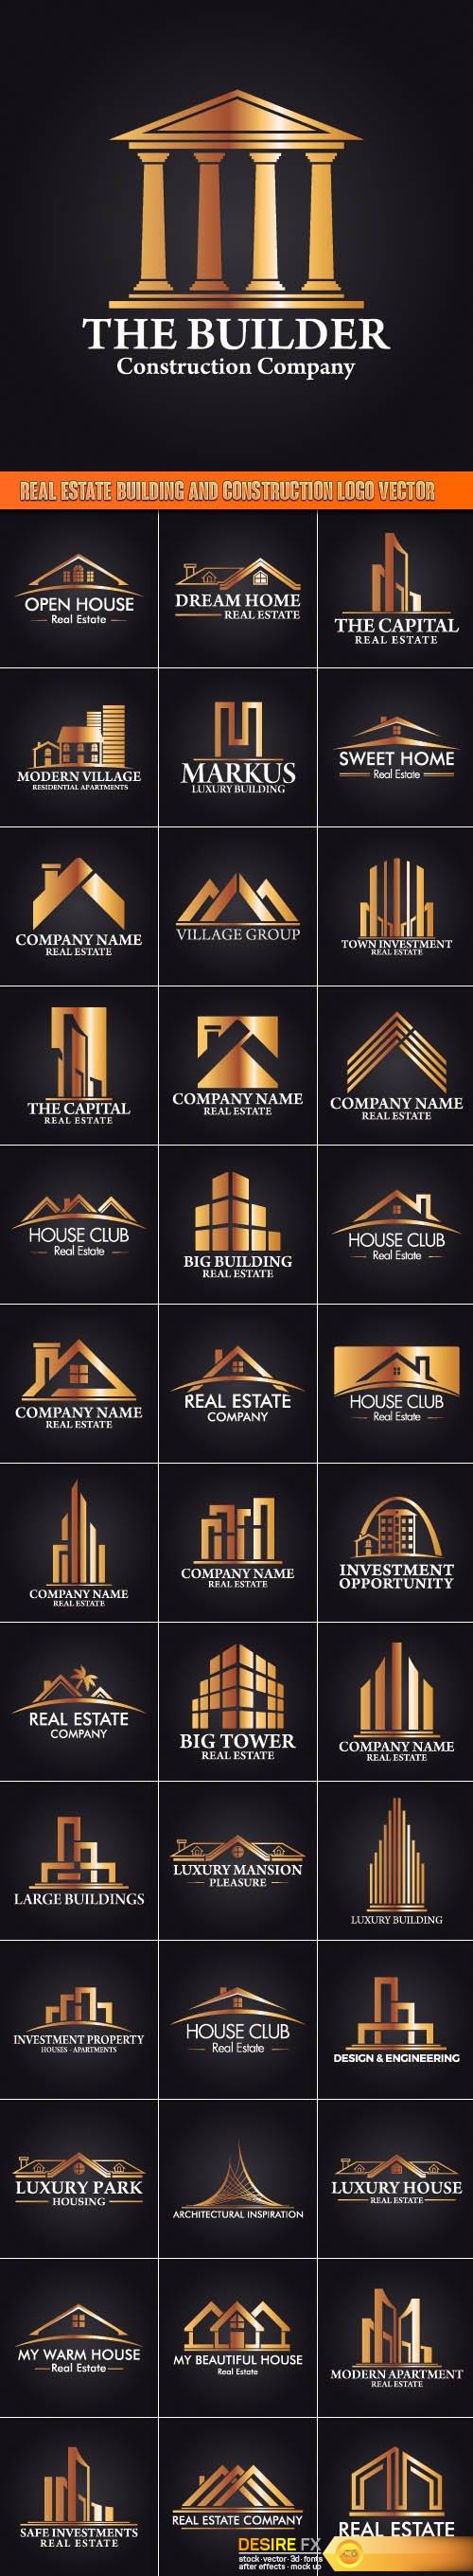 1475721118_real-estate-building-and-construction-logo-vector